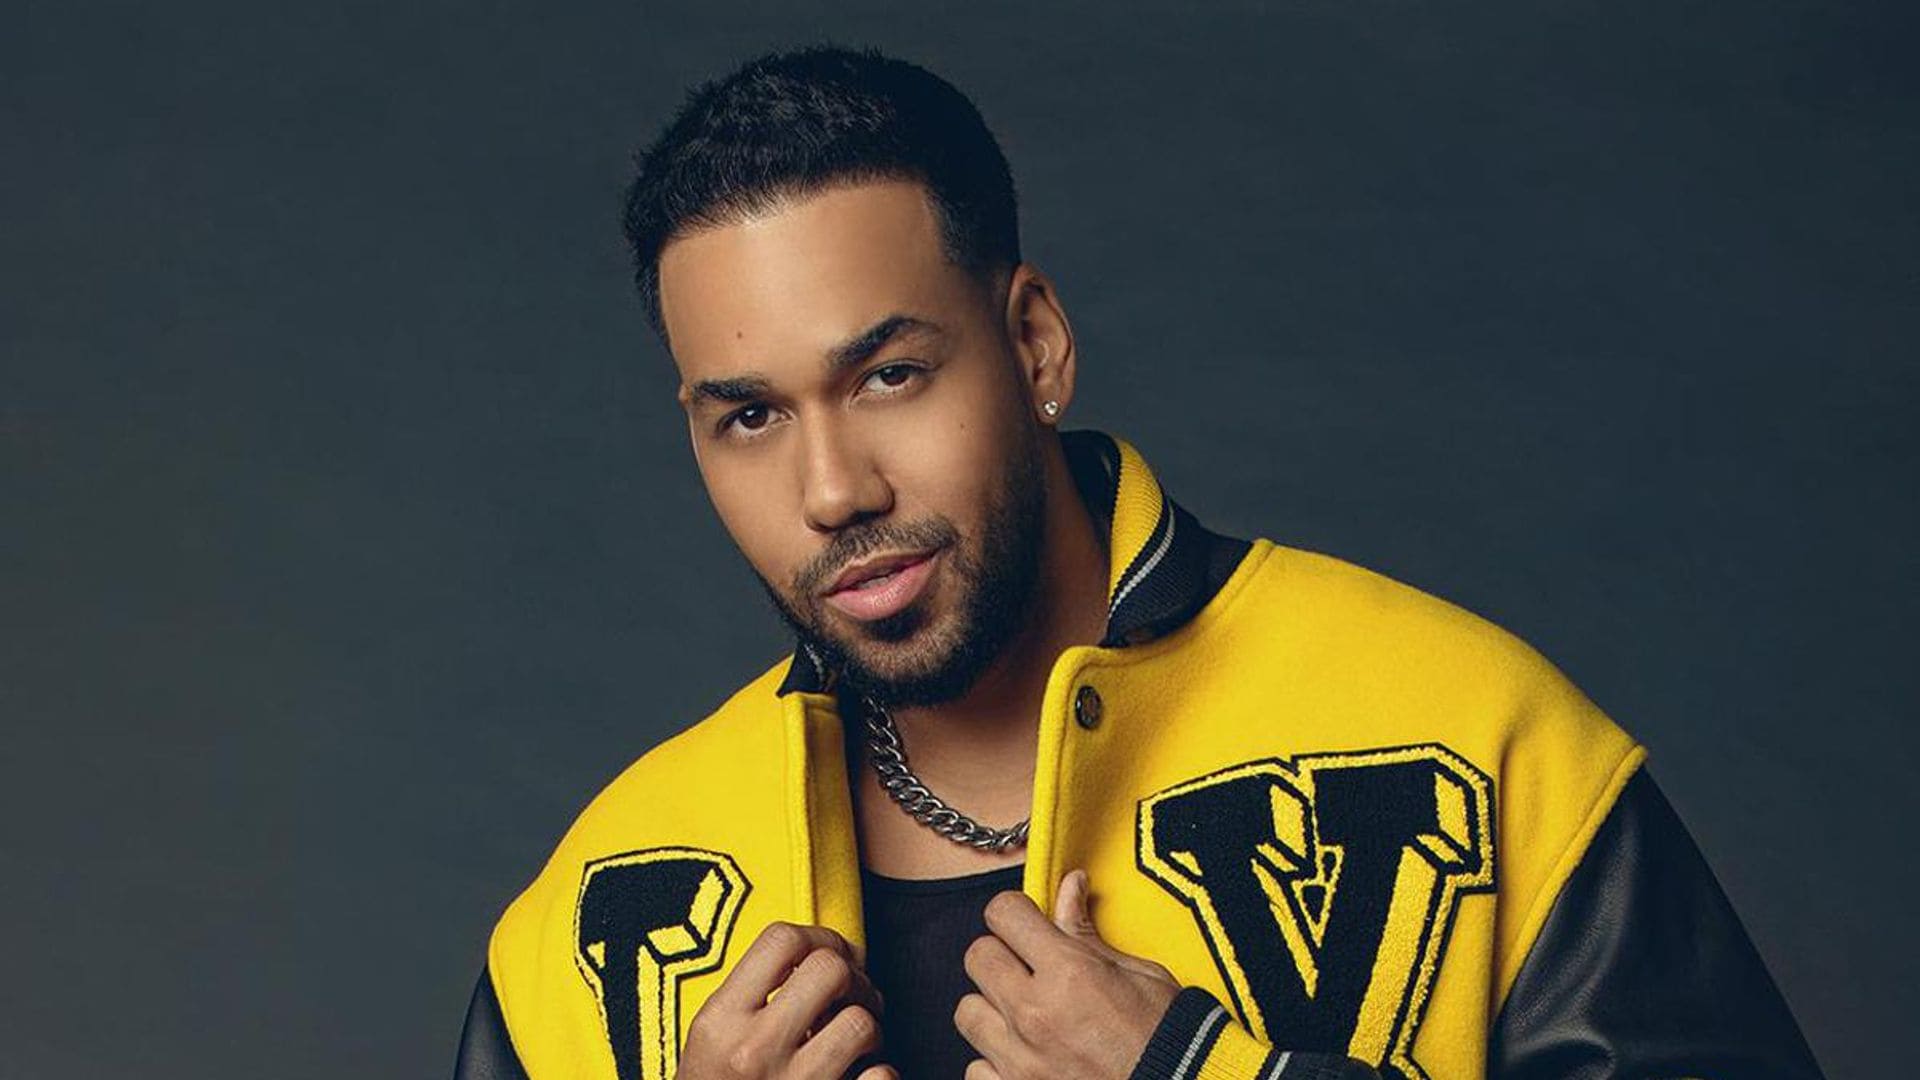 Romeo Santos enjoys a night out while looking unrecognizable on Halloween